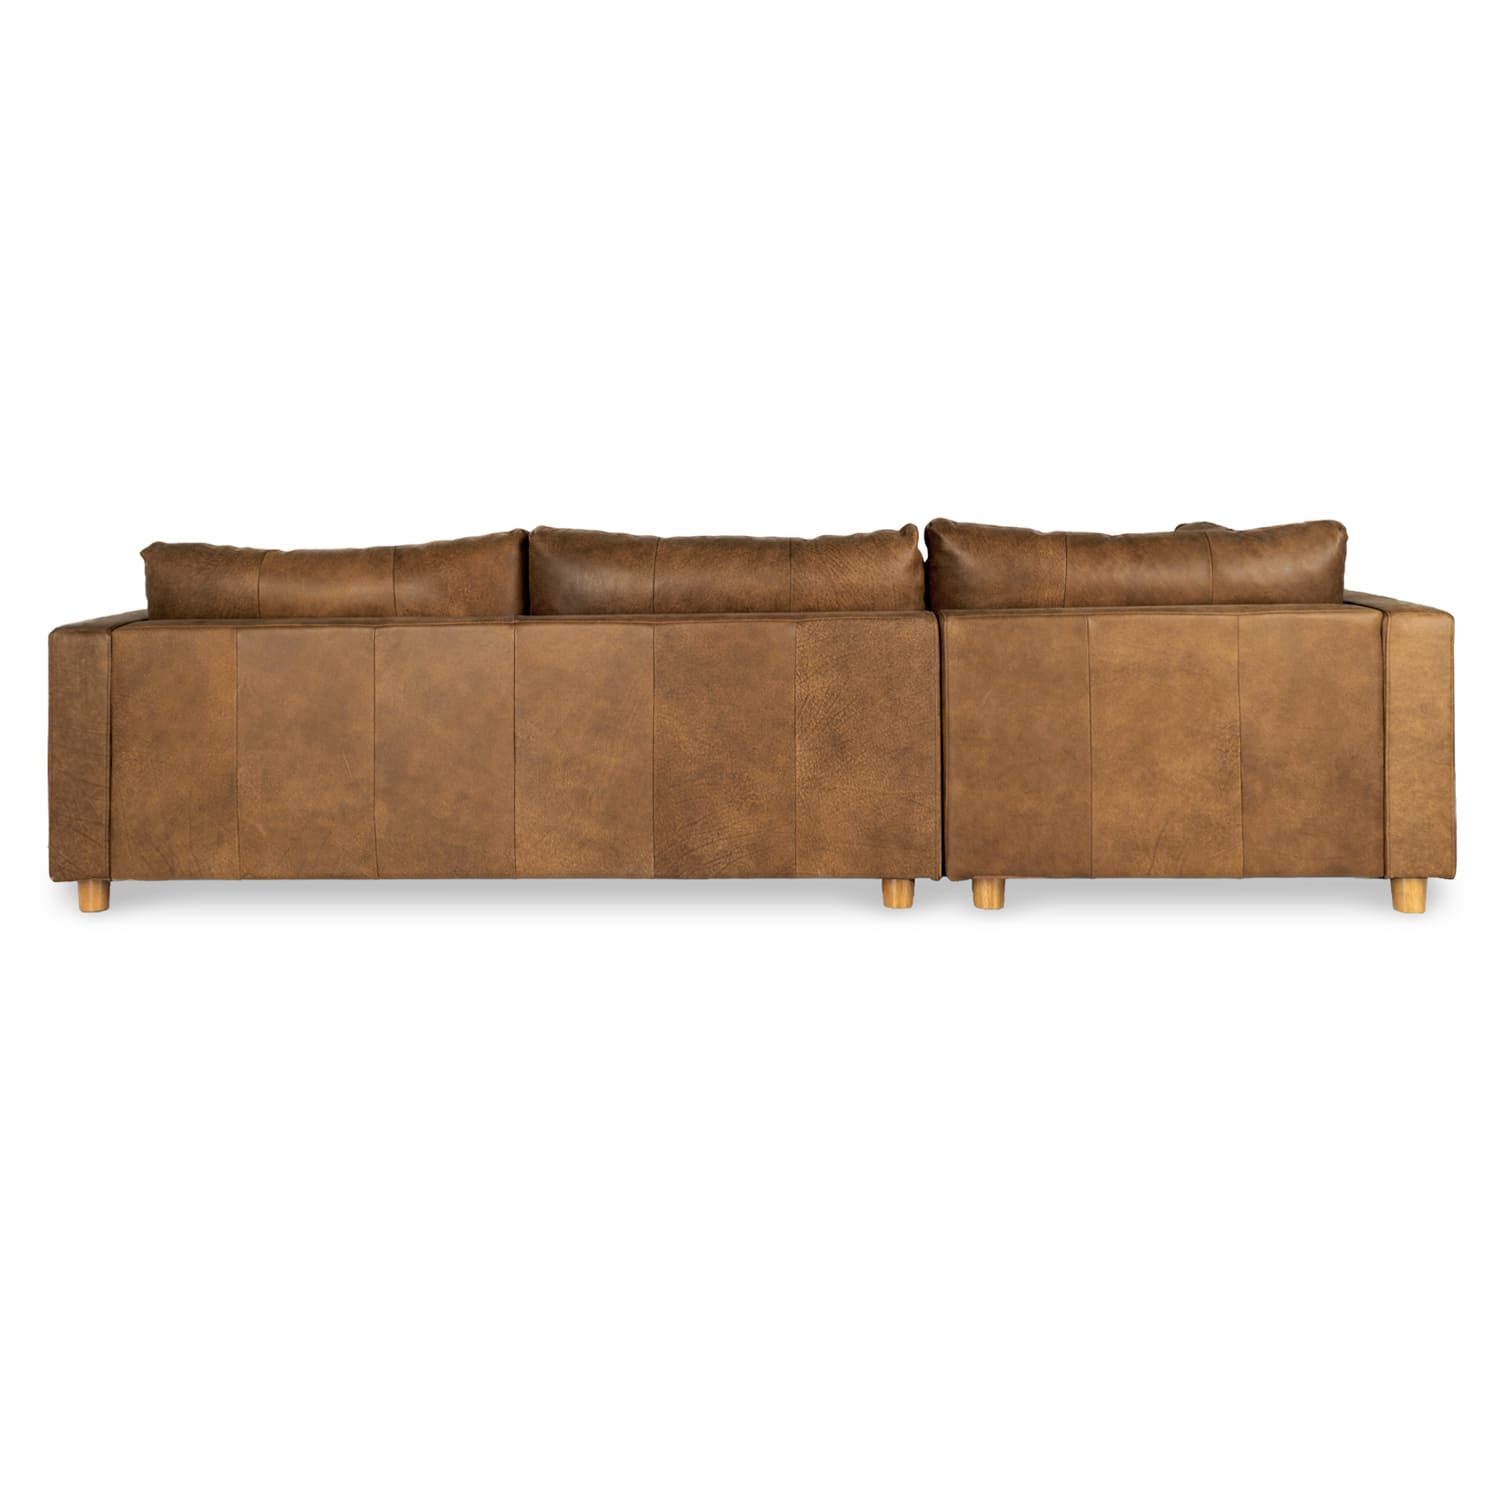 Barcelona Leather Left Side Facing Chaise Lounge